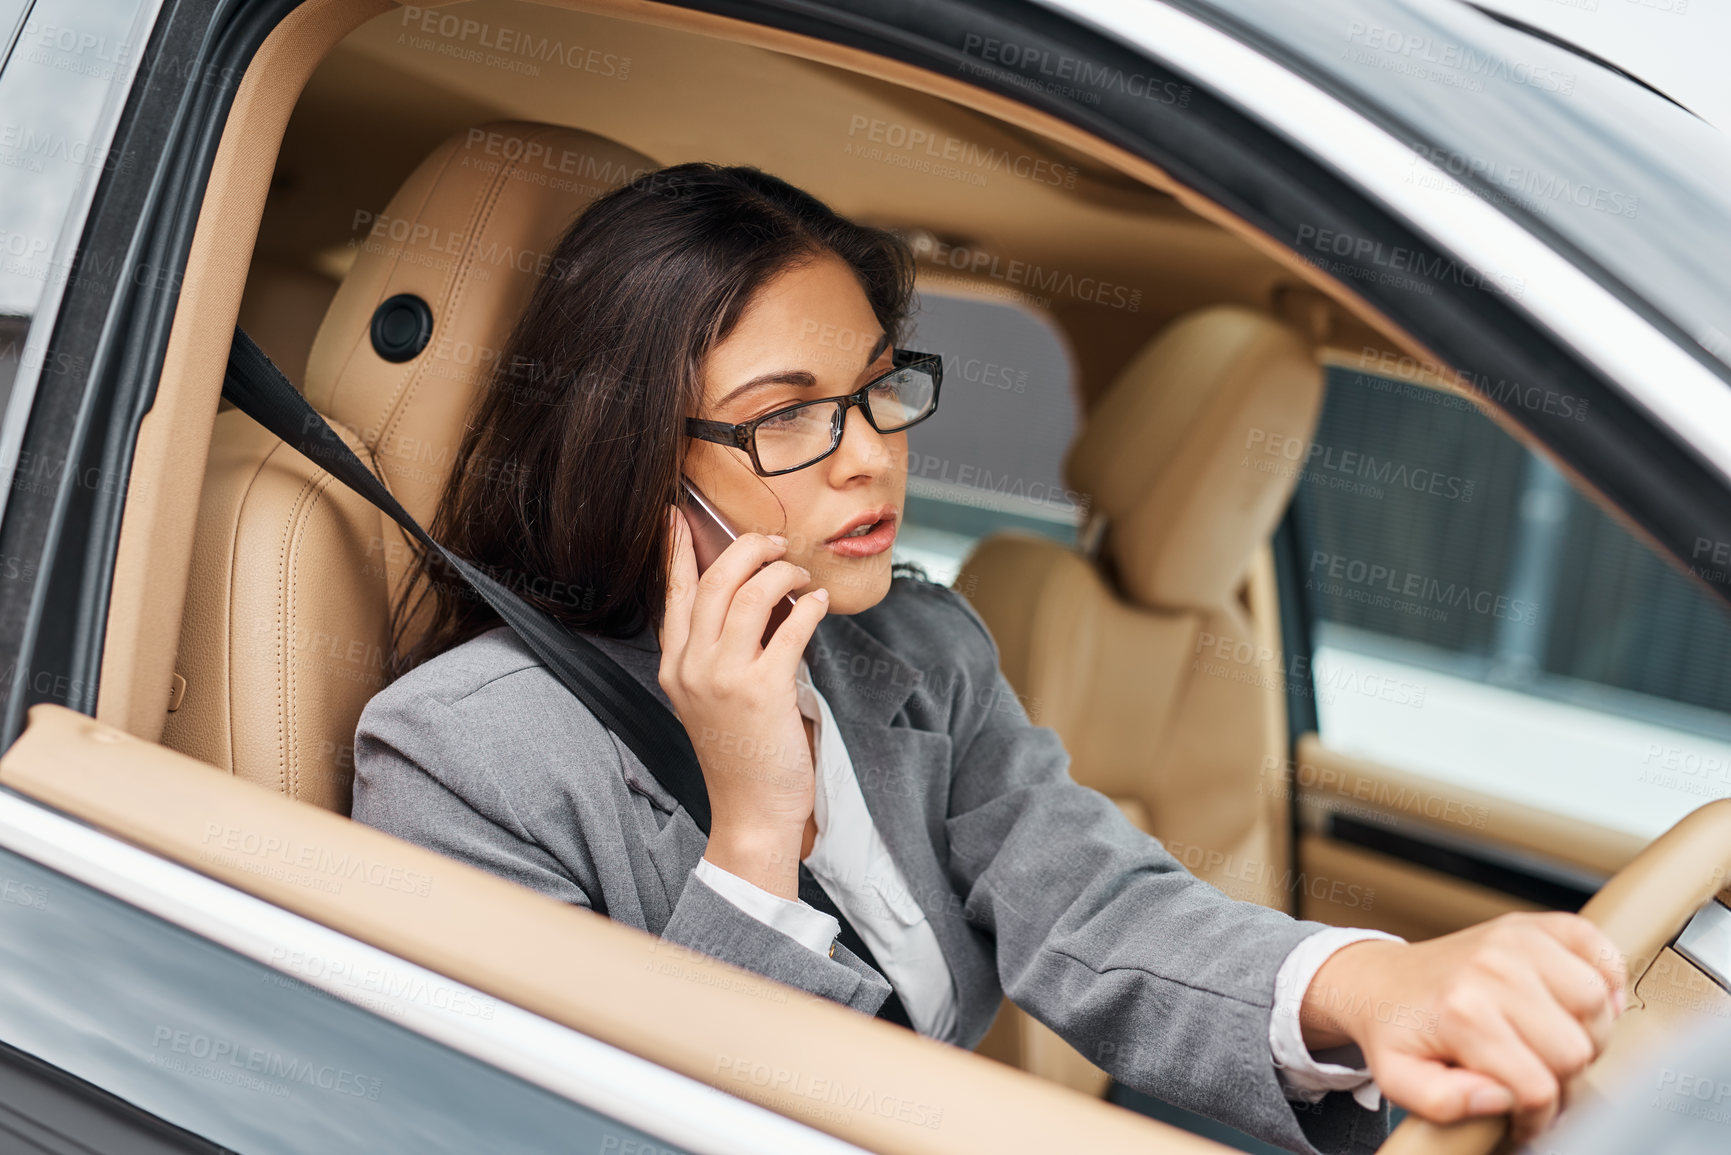 Buy stock photo Shot of a businesswoman talking on her phone while driving her car